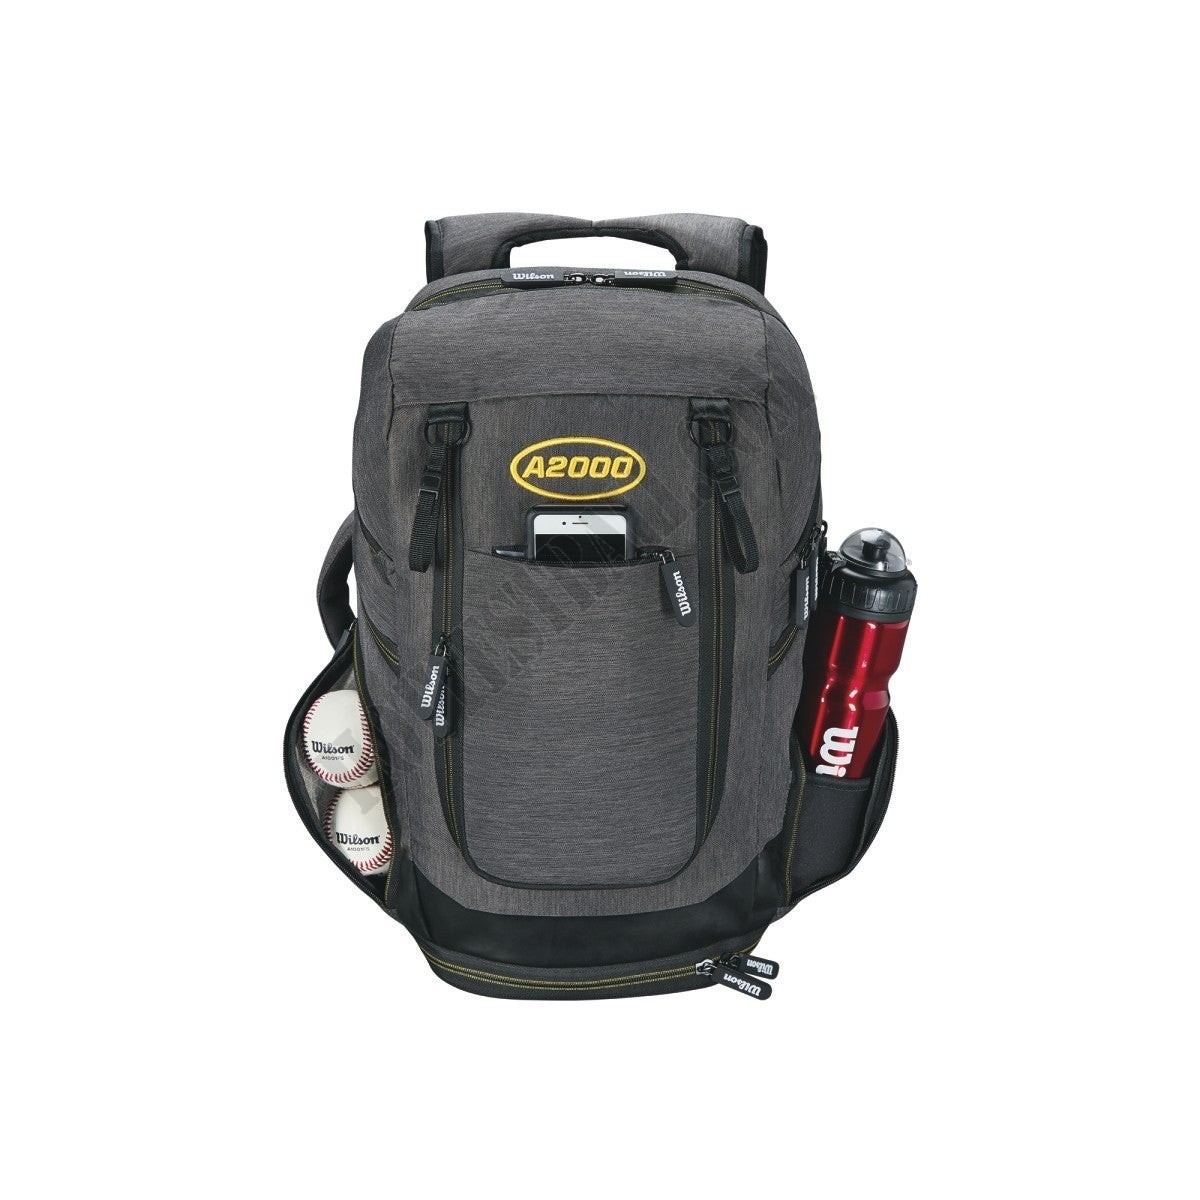 Wilson A2000 Backpack - Wilson Discount Store - -7